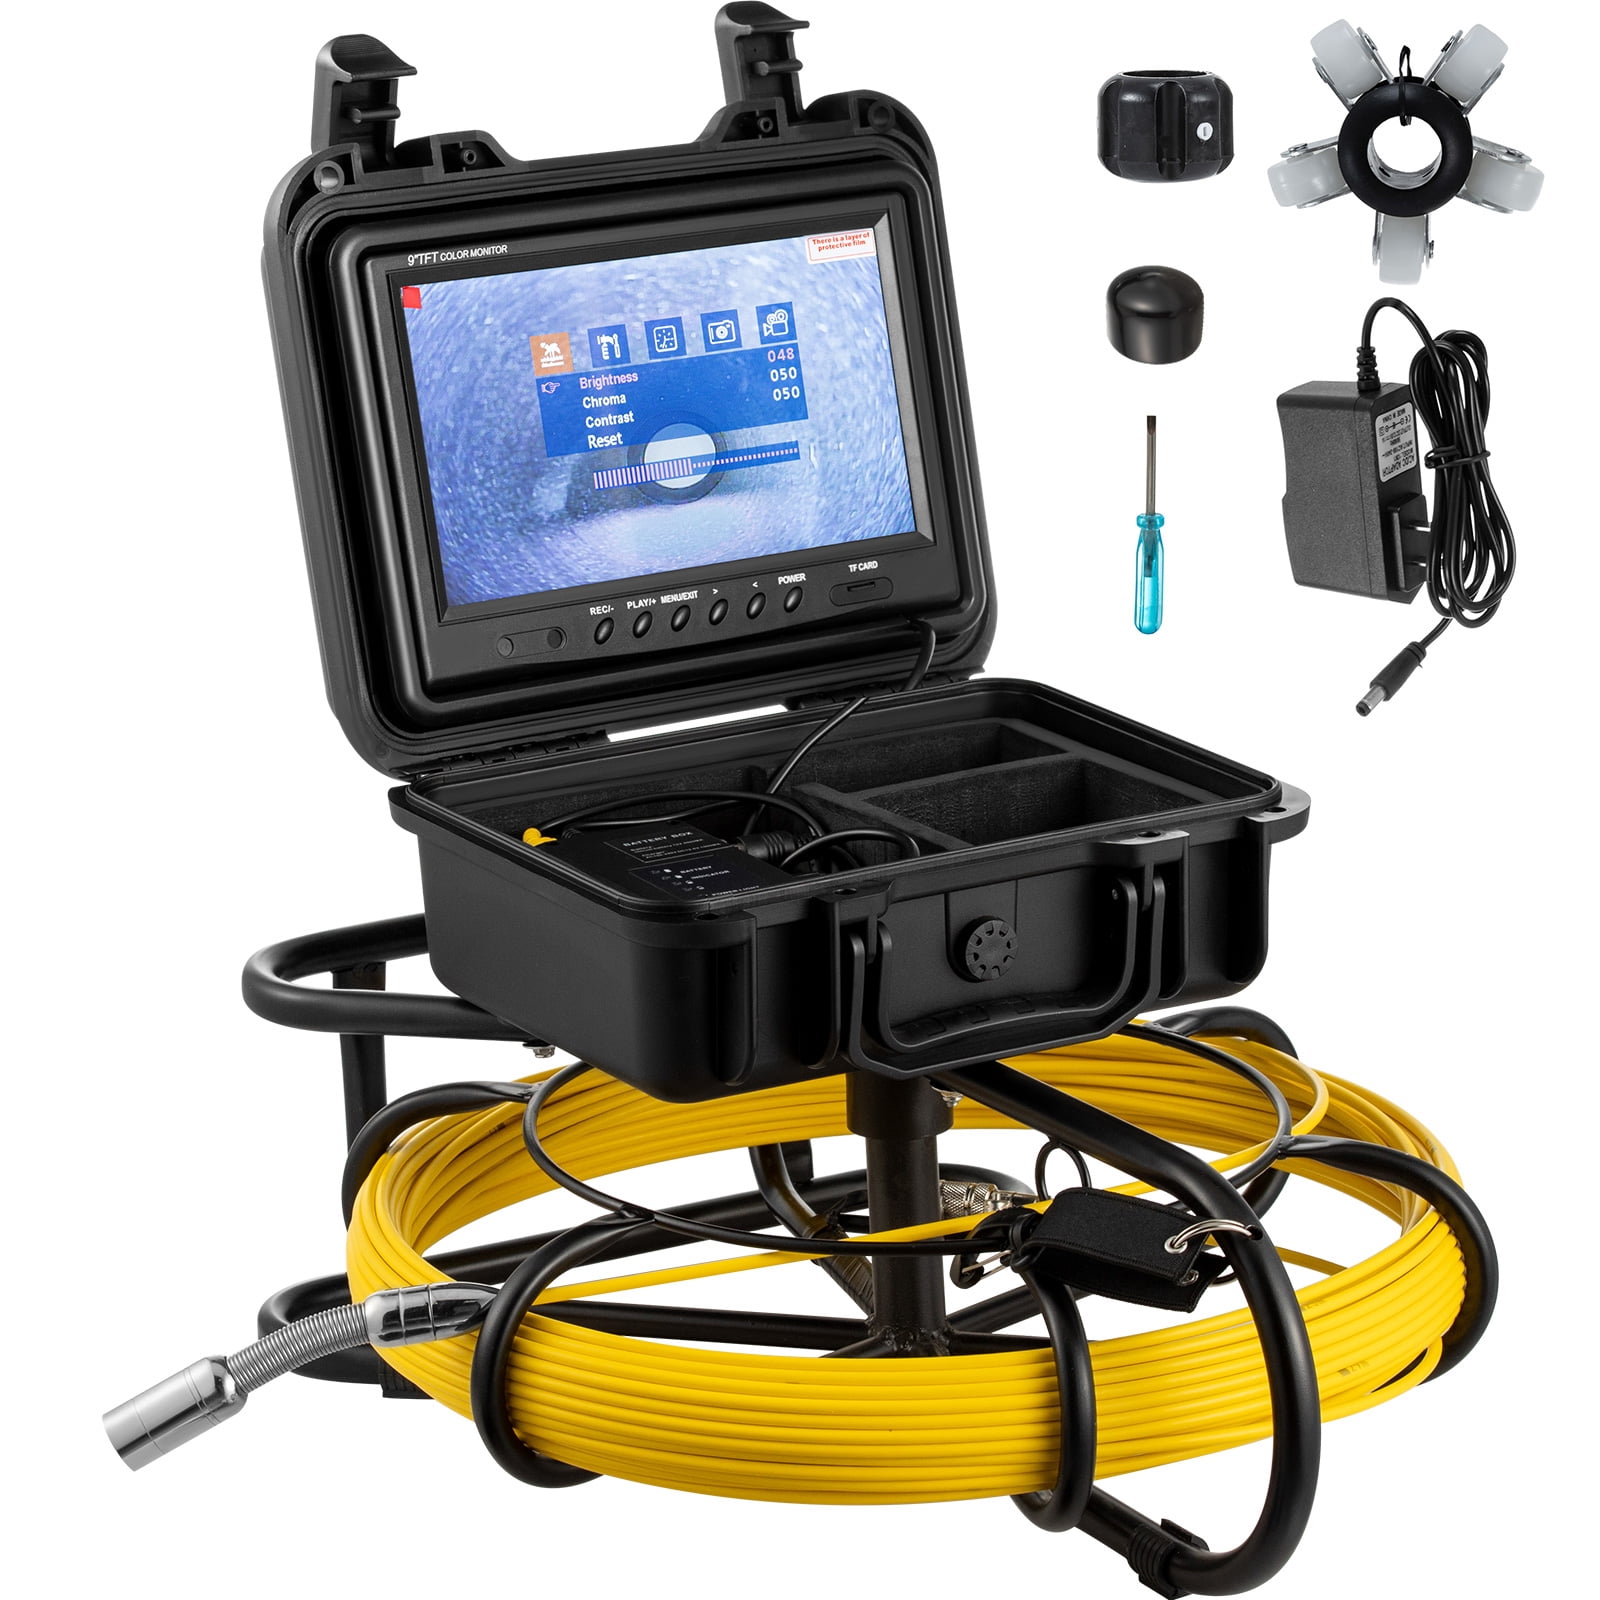 7" LCD Display 30M Sewer Waterproof Camera Pipe Pipeline Drain Inspection System 